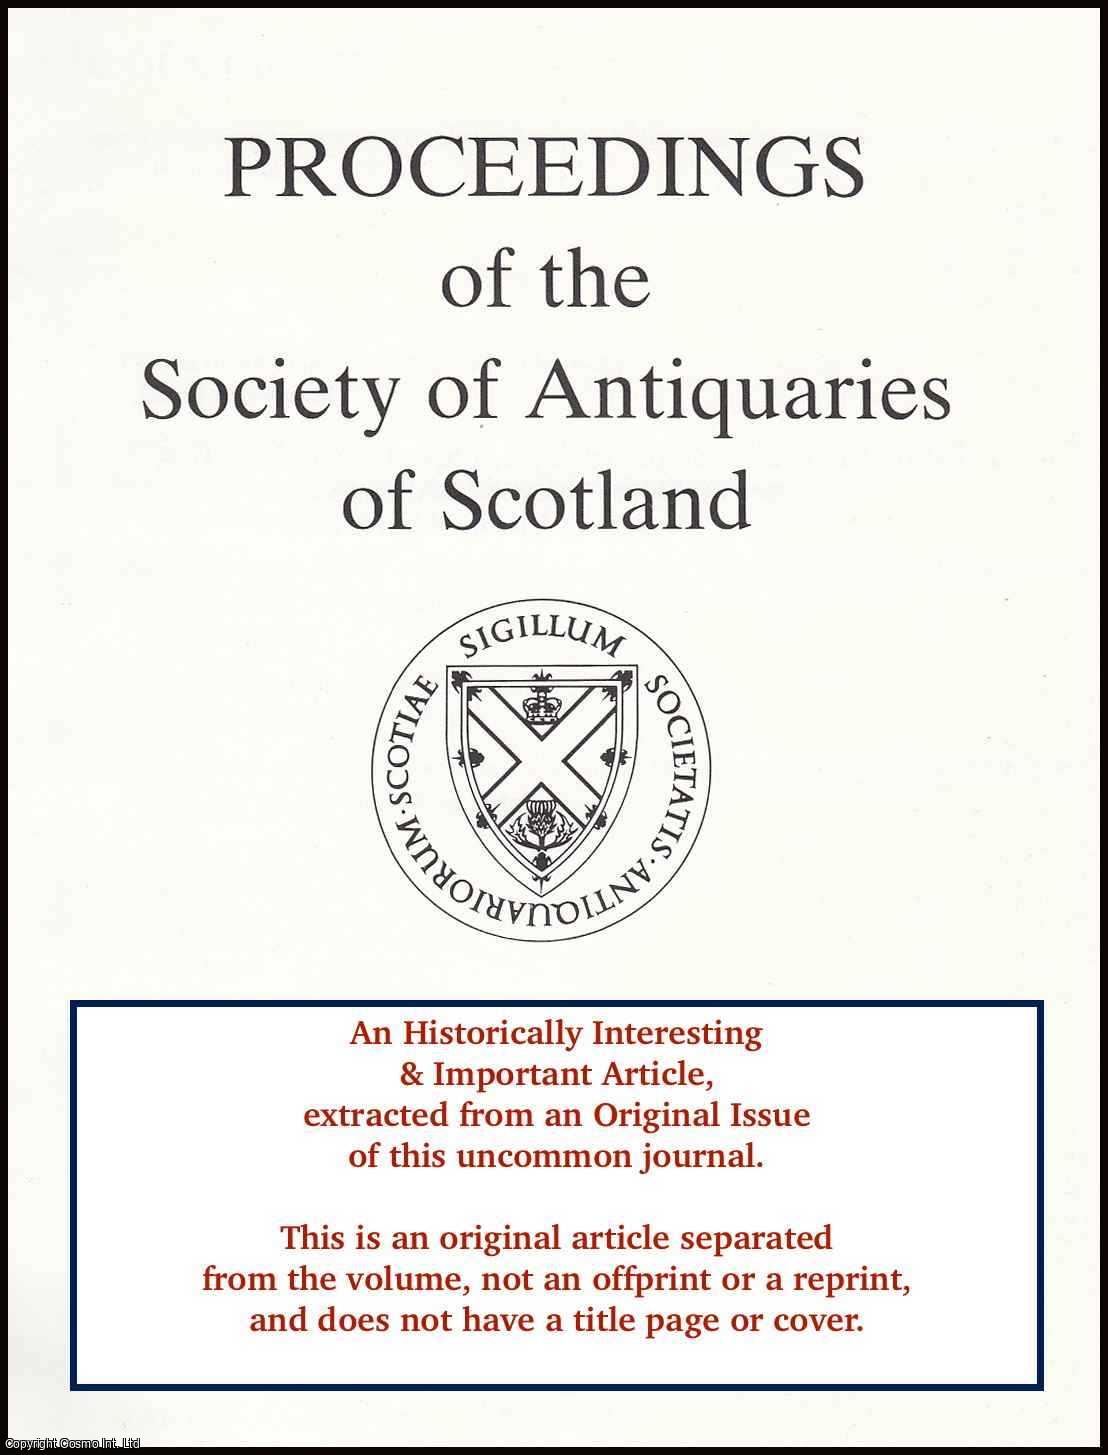 Geoffrey R. Adams - Constraints on Terminal Sounds in The Inscriptions of Early Scotland. An original article from the Proceedings of the Society of Antiquaries of Scotland, 2006.